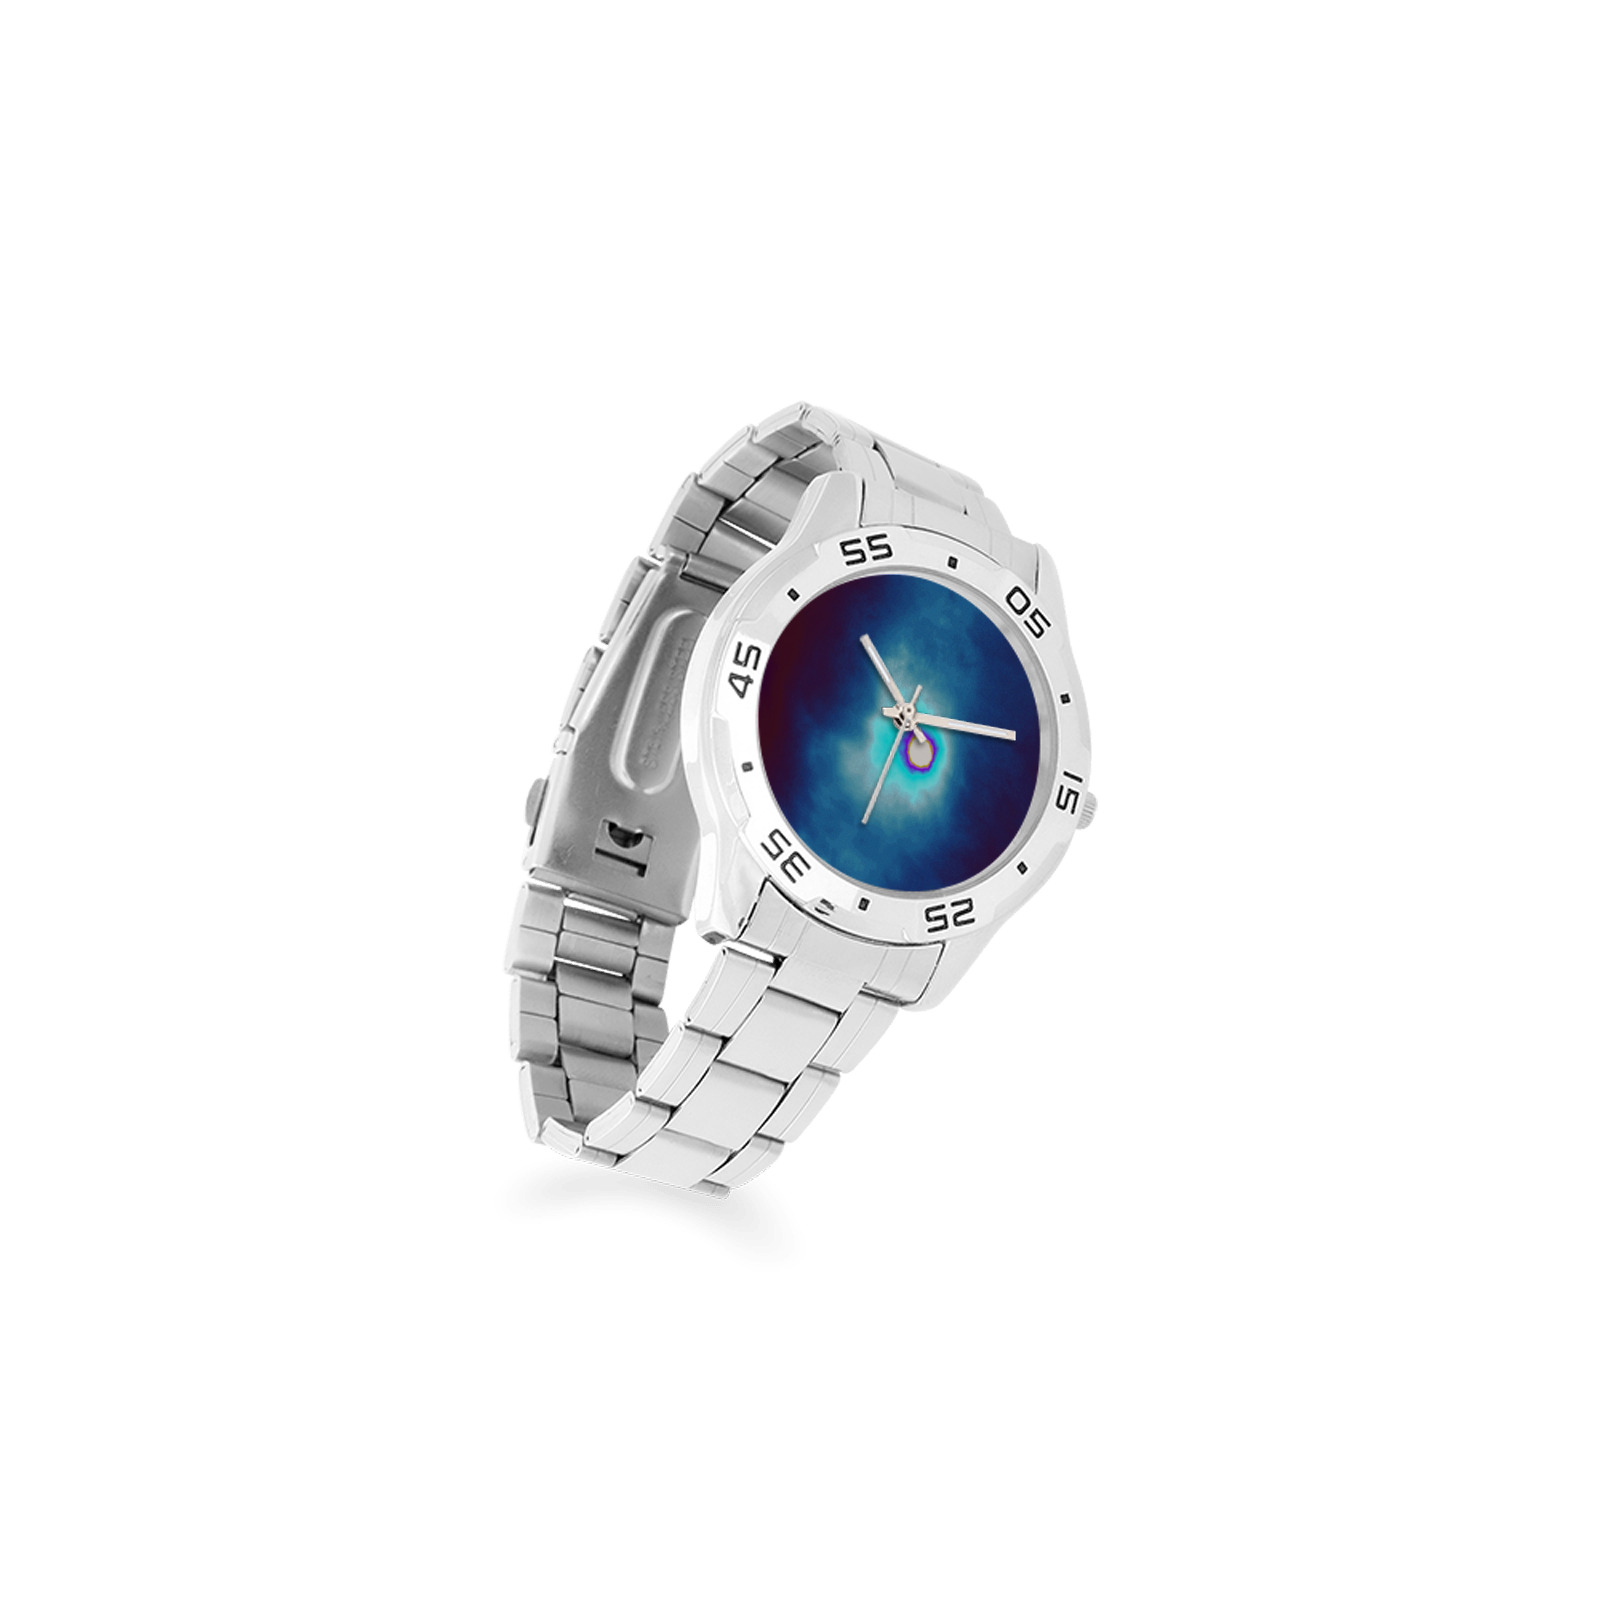 Dimensional Eclipse In The Multiverse 496222 Men's Stainless Steel Analog Watch(Model 108)